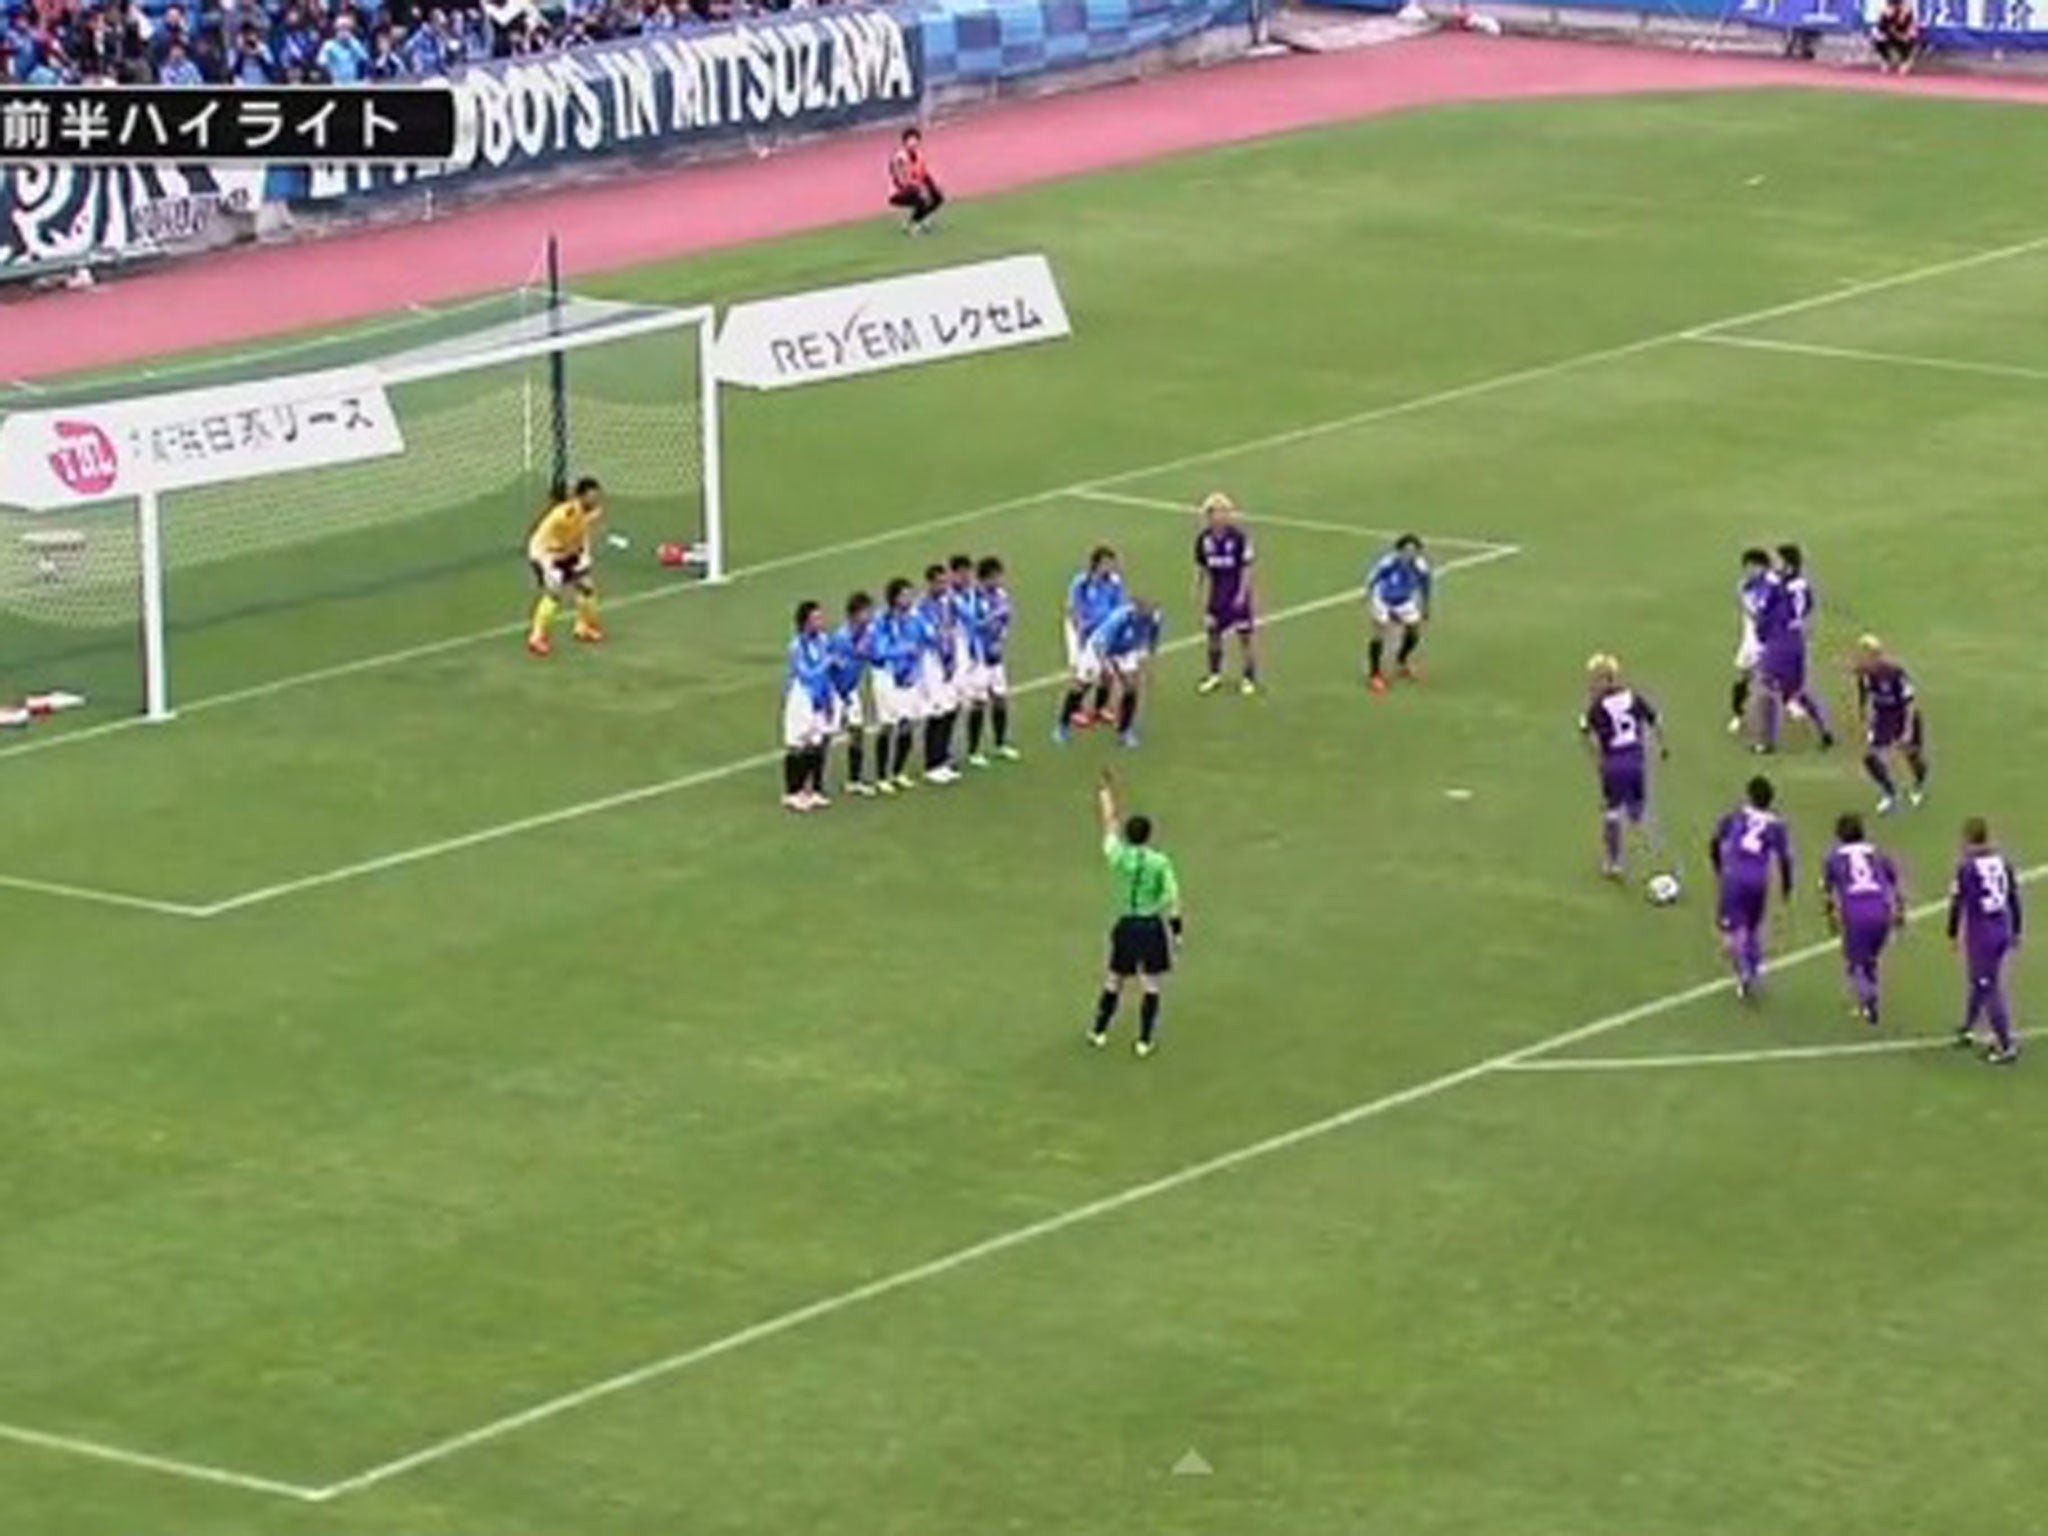 Kyoto Sanga (in purple) and that incredible routine